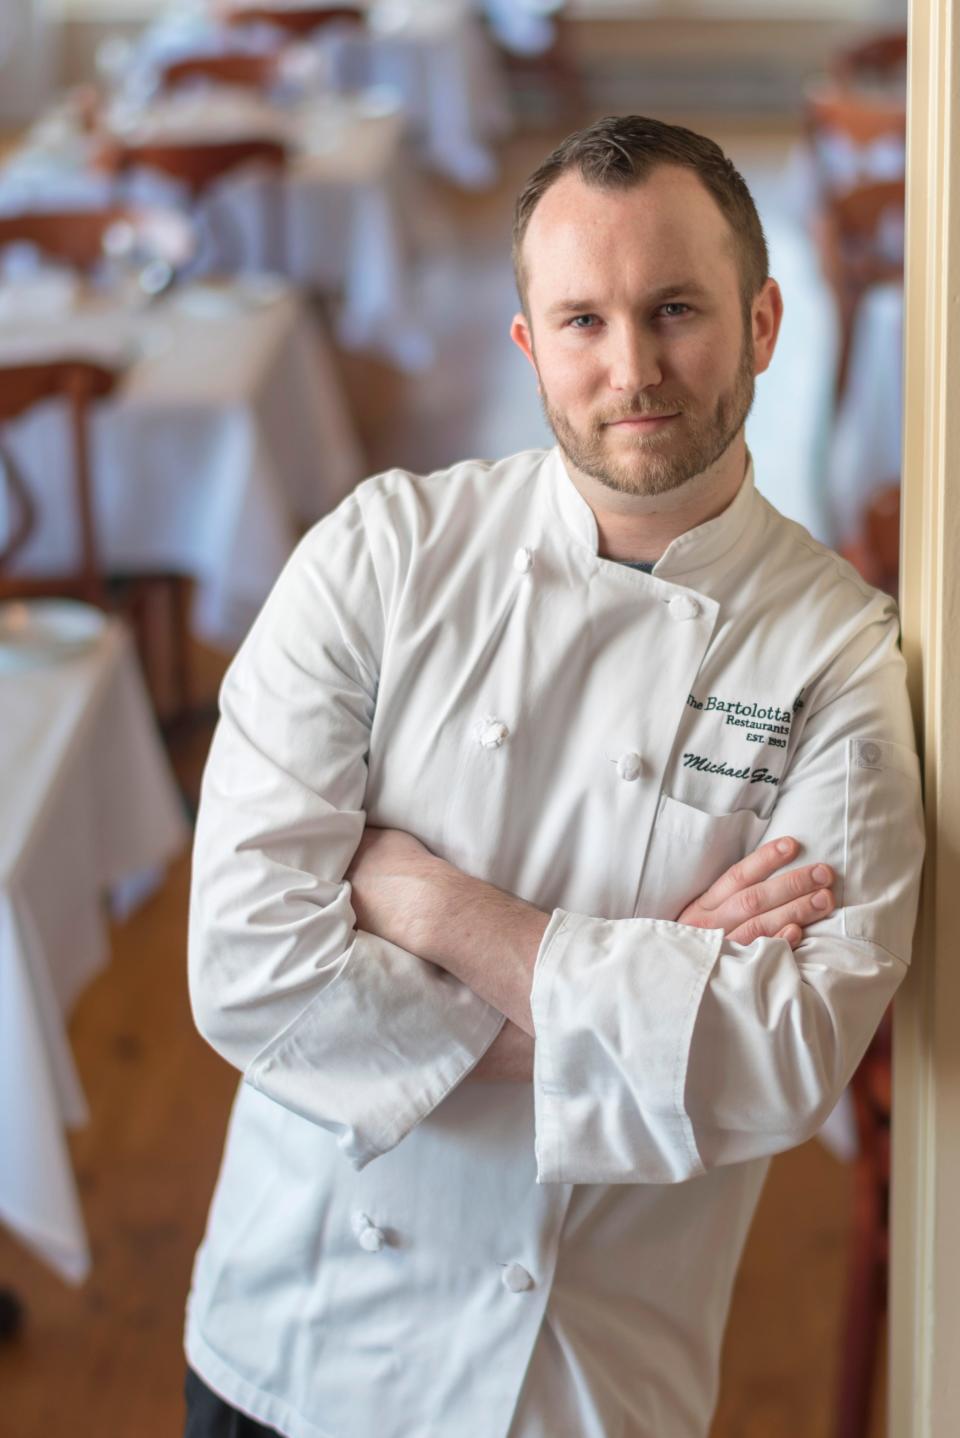 Michael Genre is the new executive chef at Harbor House restaurant in Milwaukee.